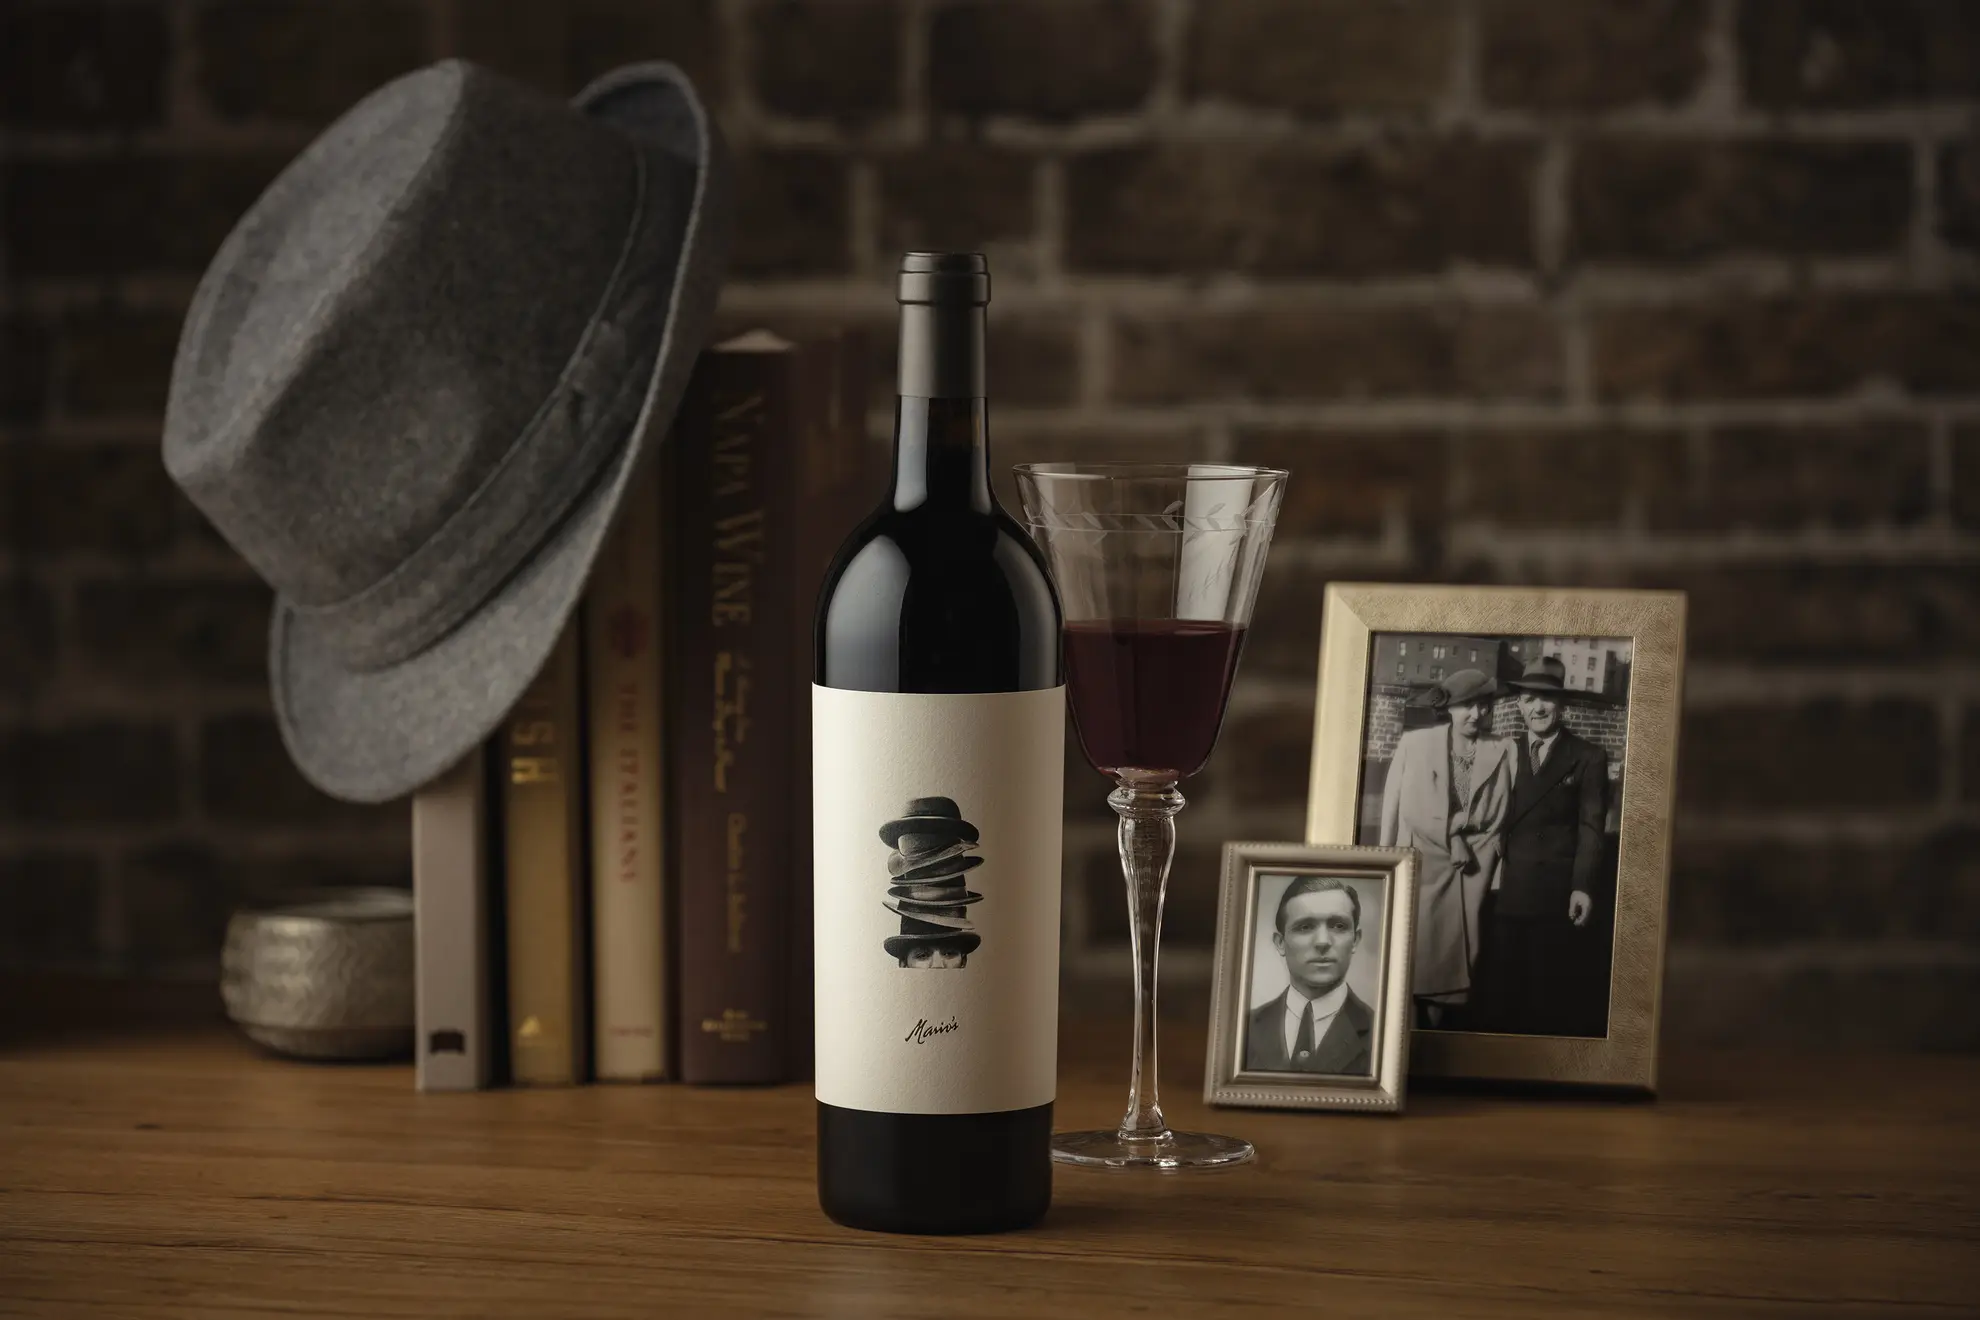 A bottle of wine sits on a table next to a hat.